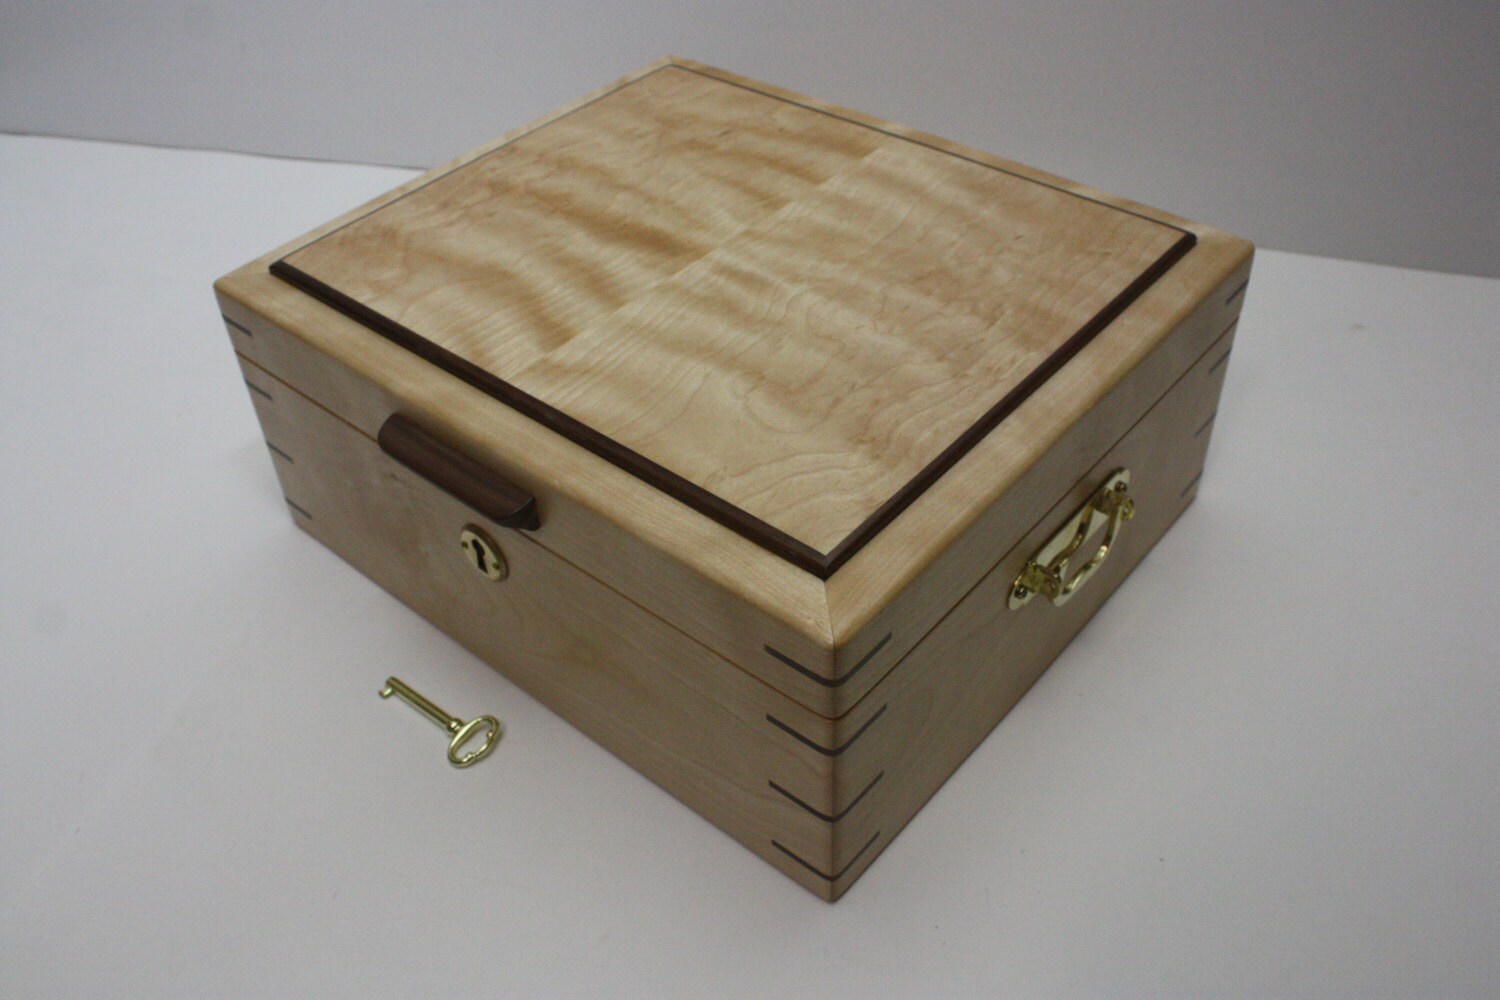 How To Make A Birch Box With Hand Tools